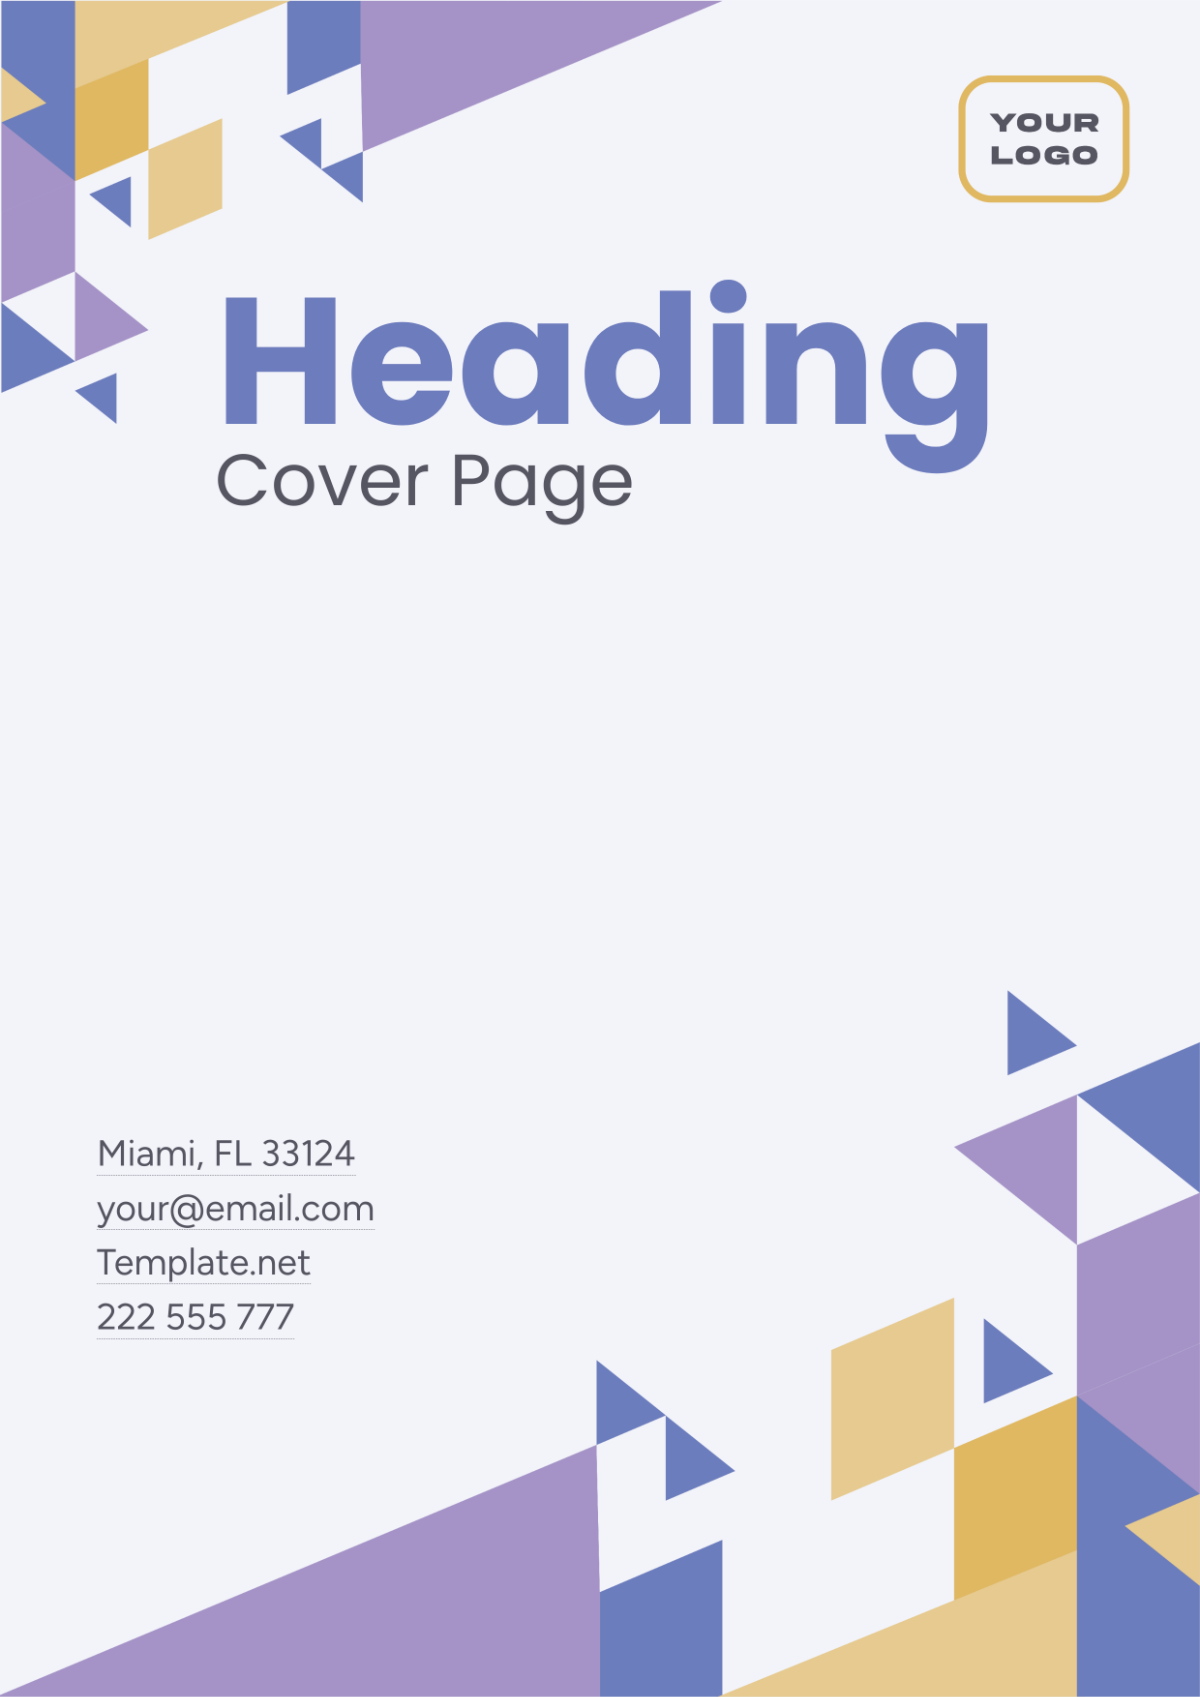 Heading Cover Page